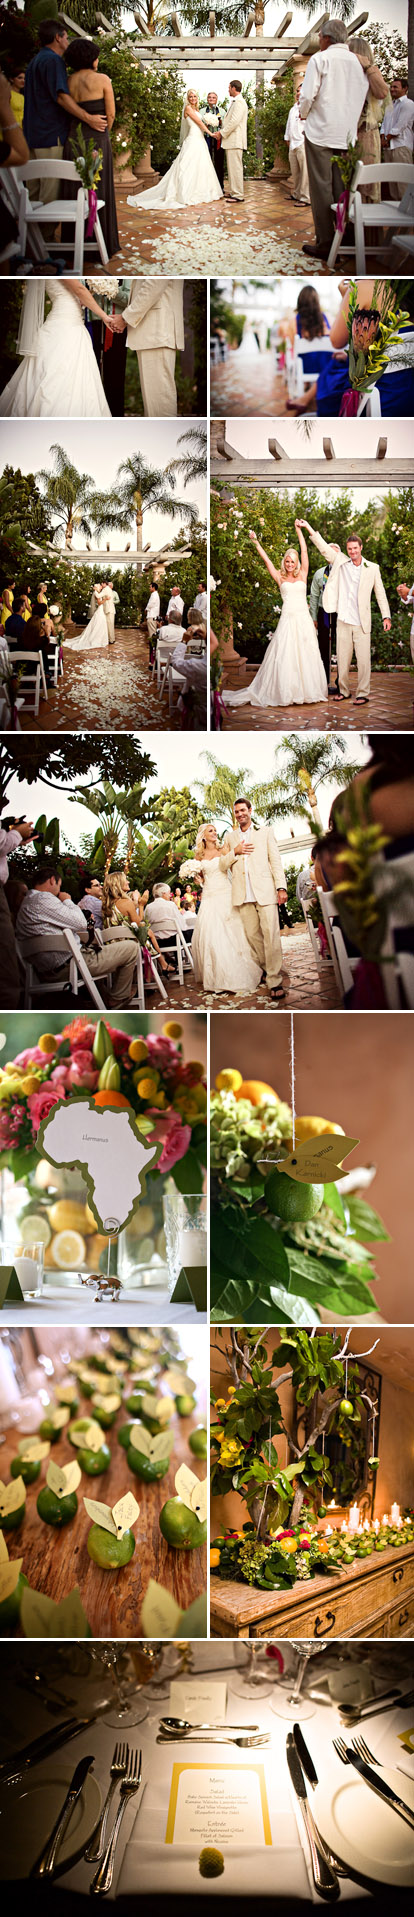 San Diego wedding at Rancho Valencia Resort, outdoor wedding ceremony, lime green, lemon yellow, orange and pink wedding flowers and decor, images by Natalie Moser Photography